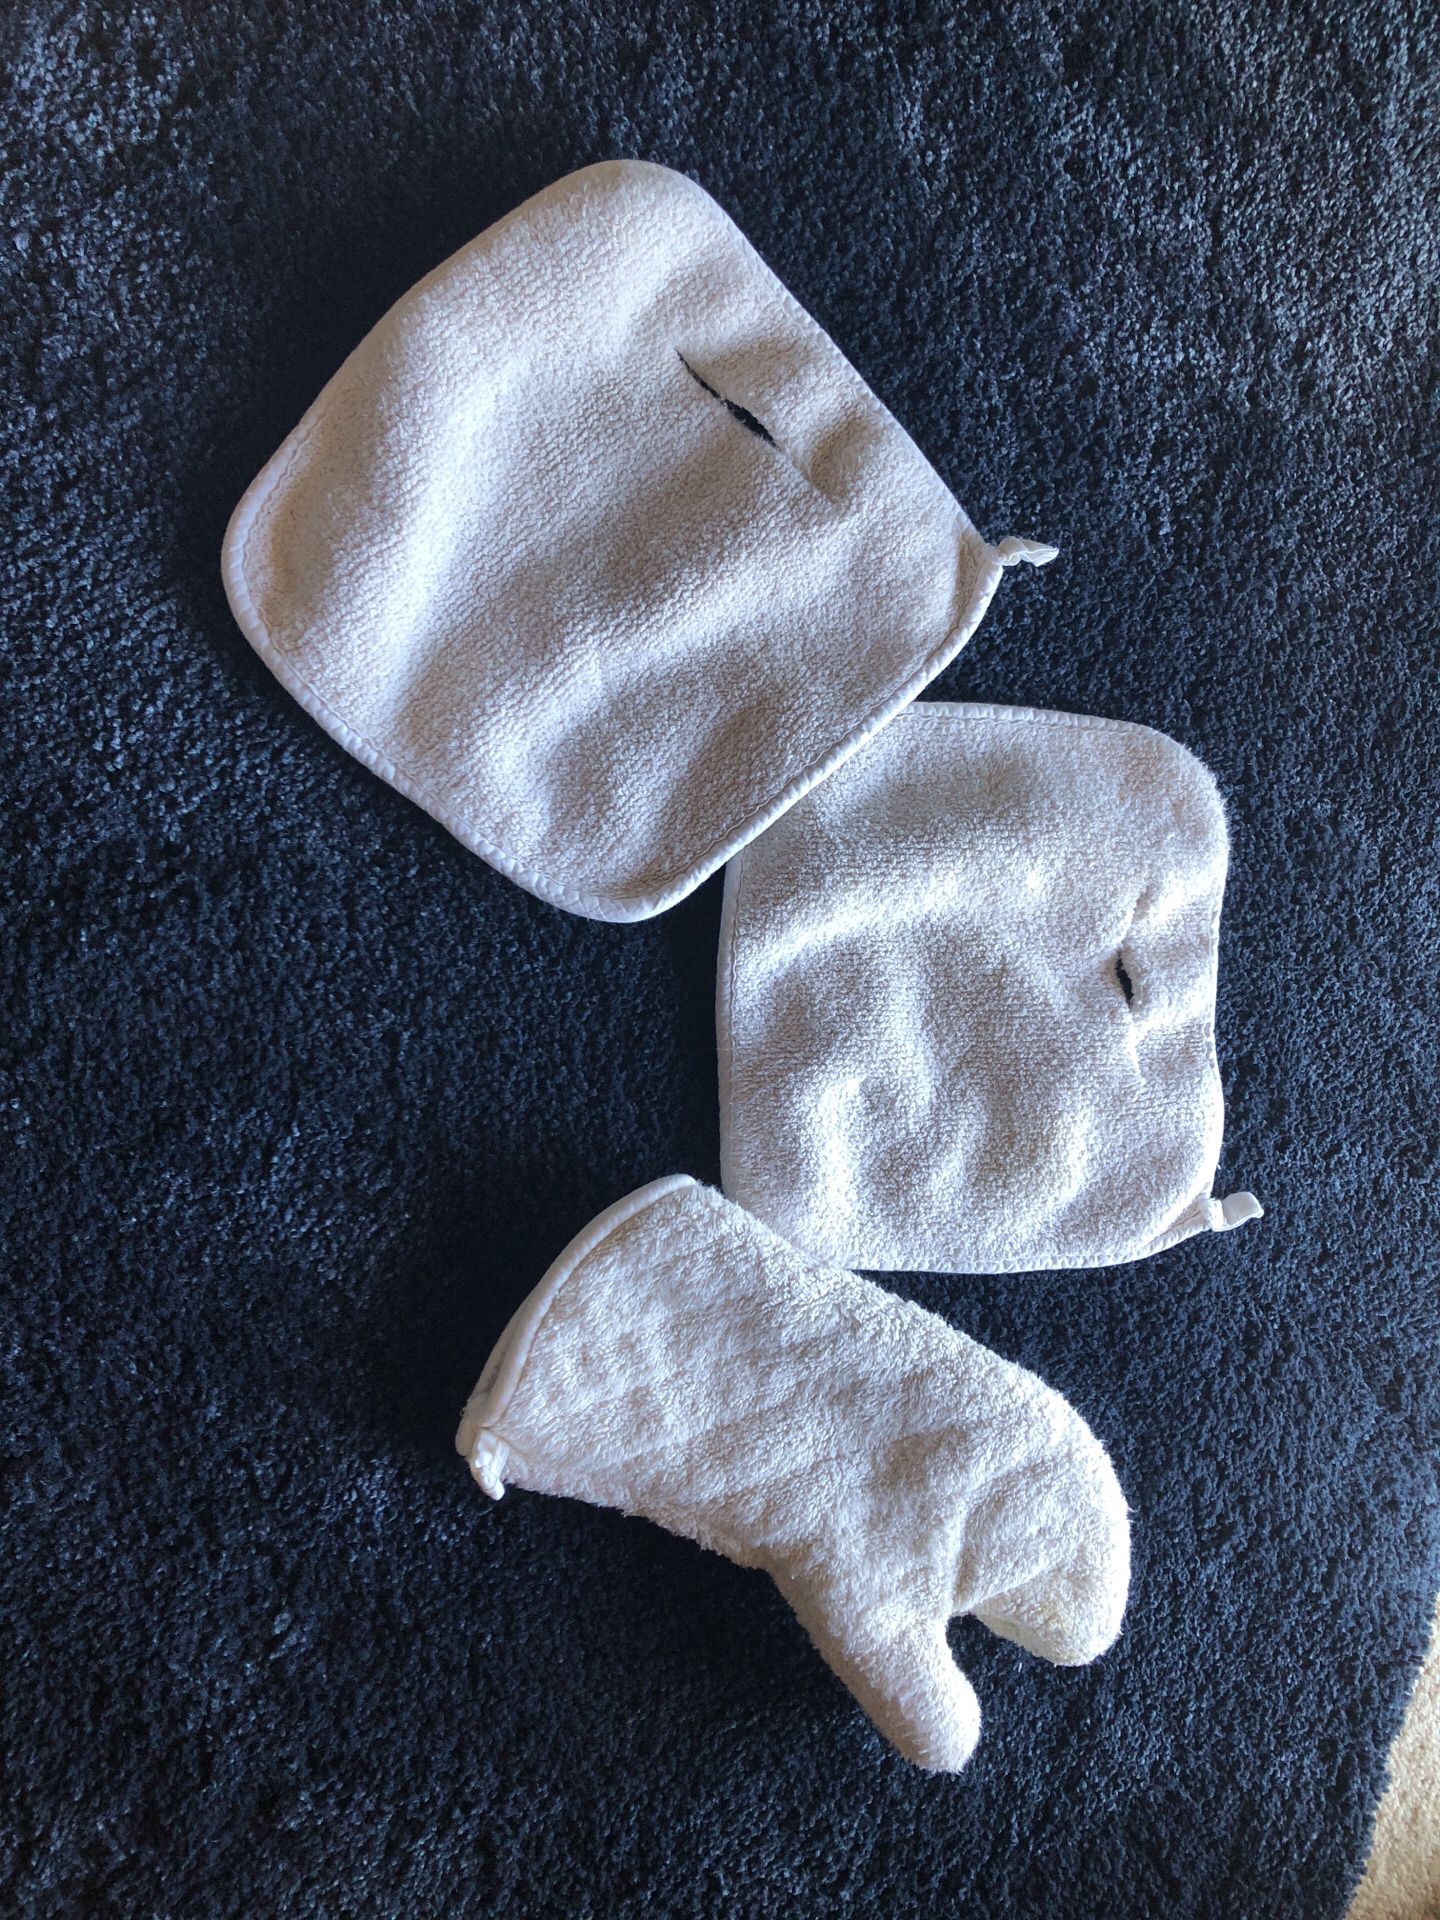 Find more 1 Pampered Chef Oven Mitts Guc for sale at up to 90% off